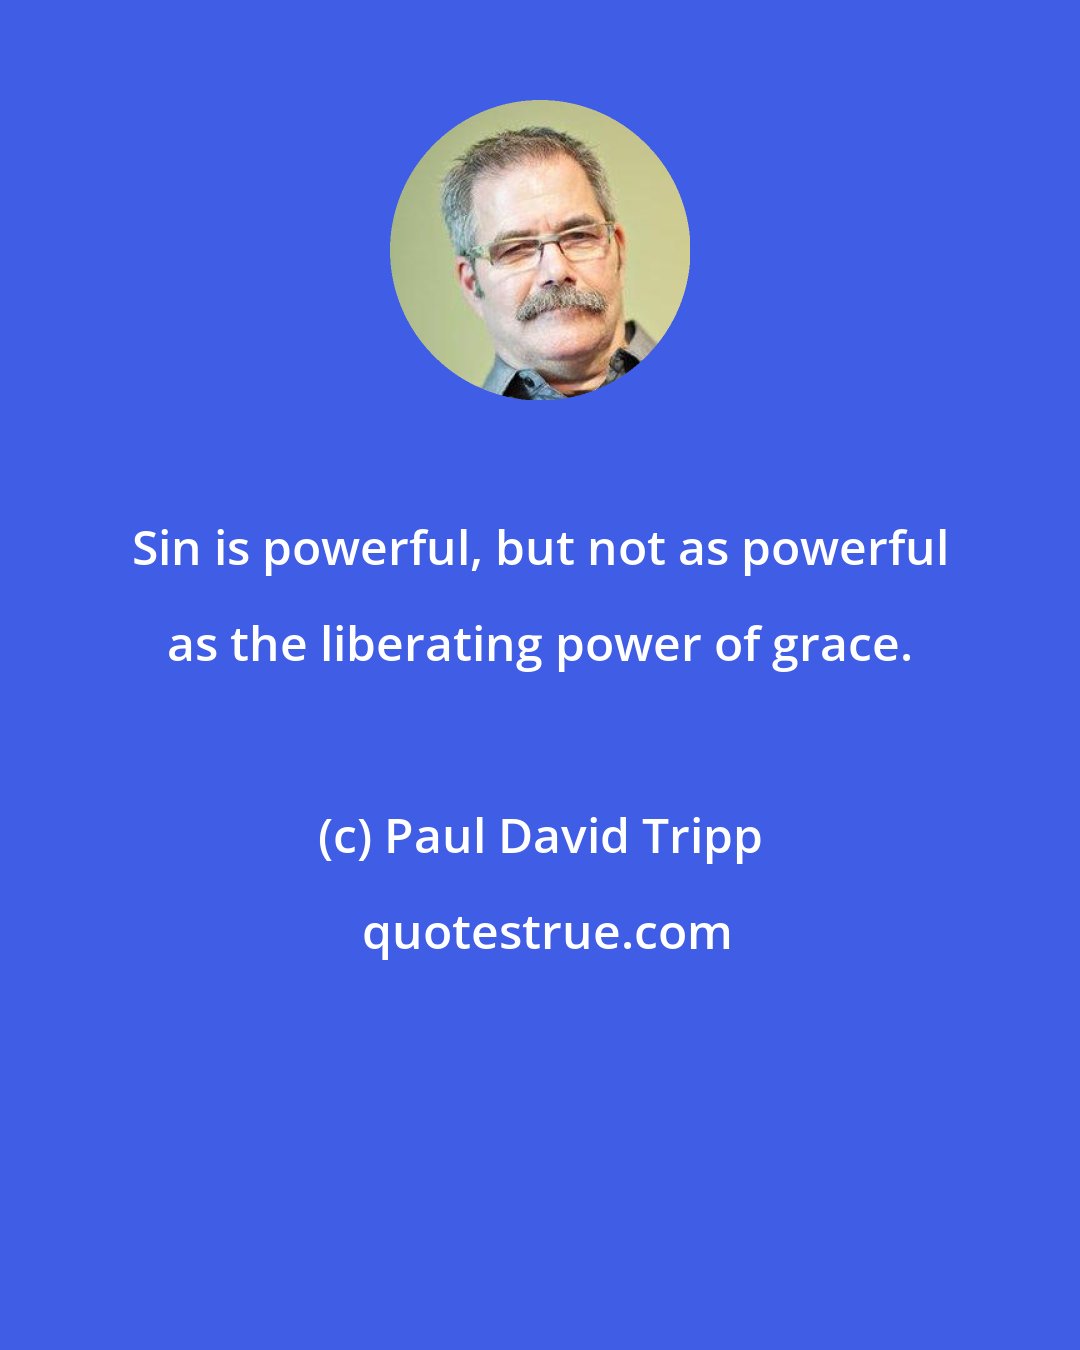 Paul David Tripp: Sin is powerful, but not as powerful as the liberating power of grace.